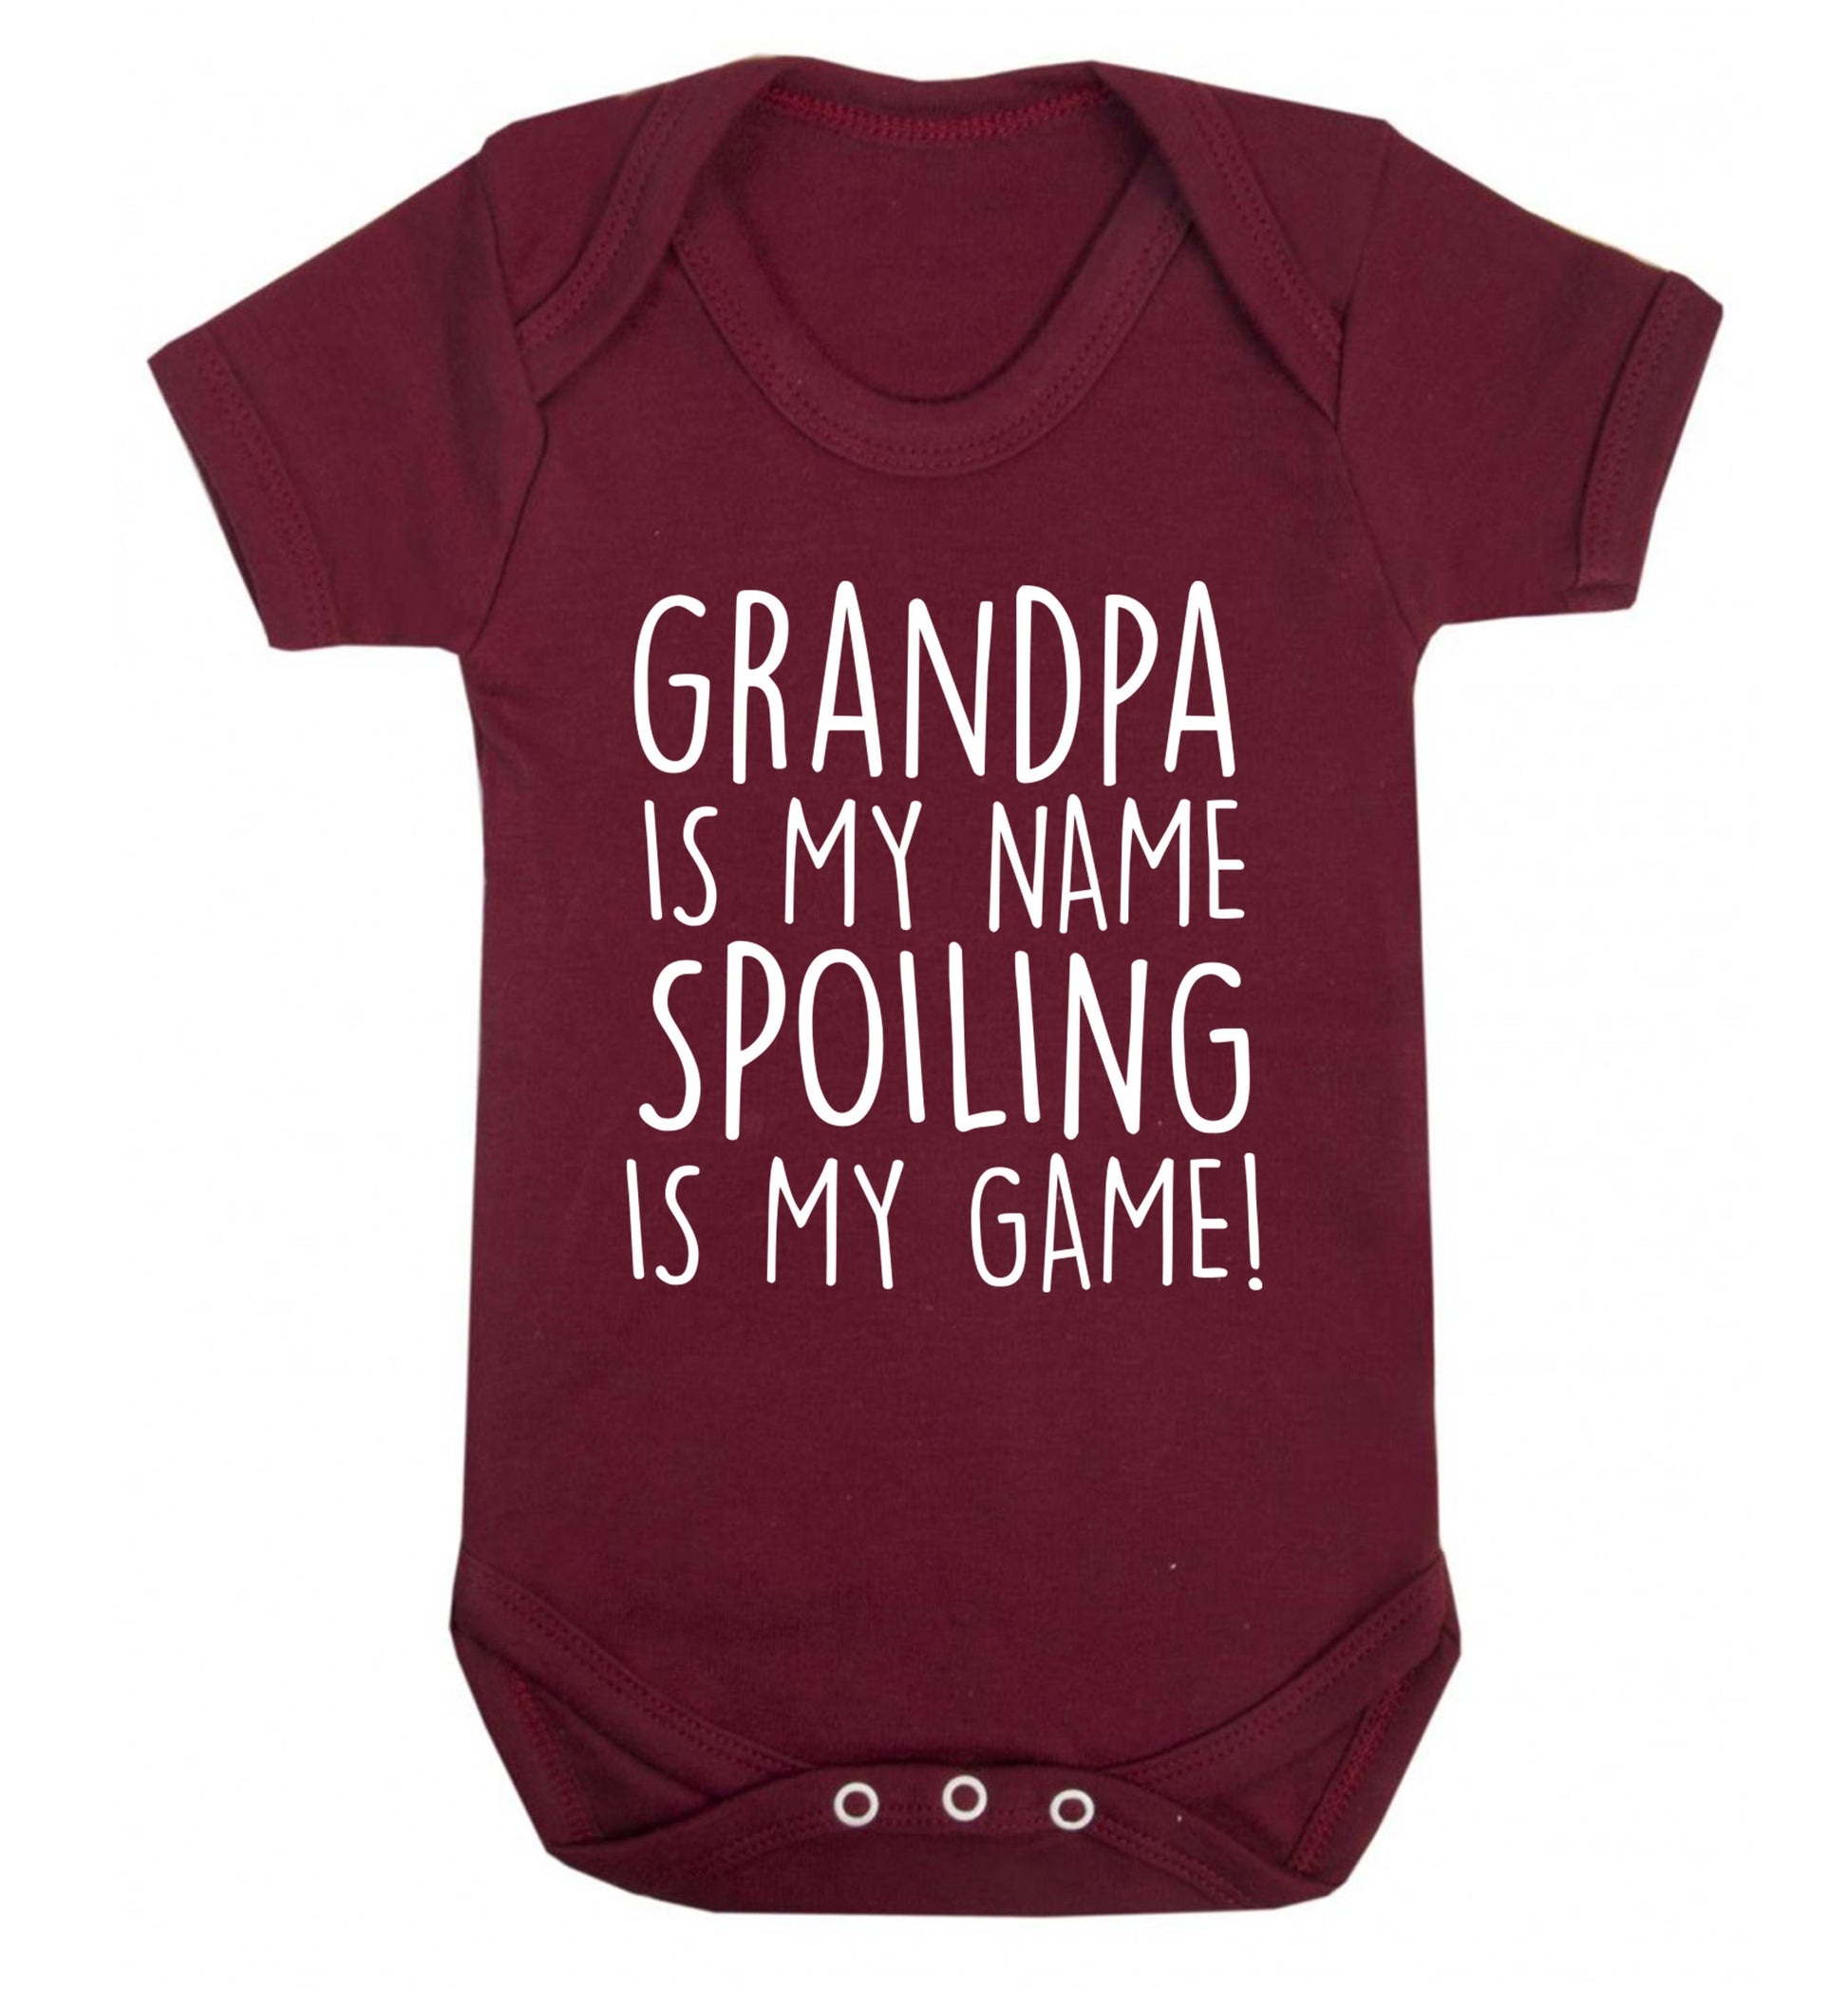 Grandpa is my name, spoiling is my game Baby Vest maroon 18-24 months